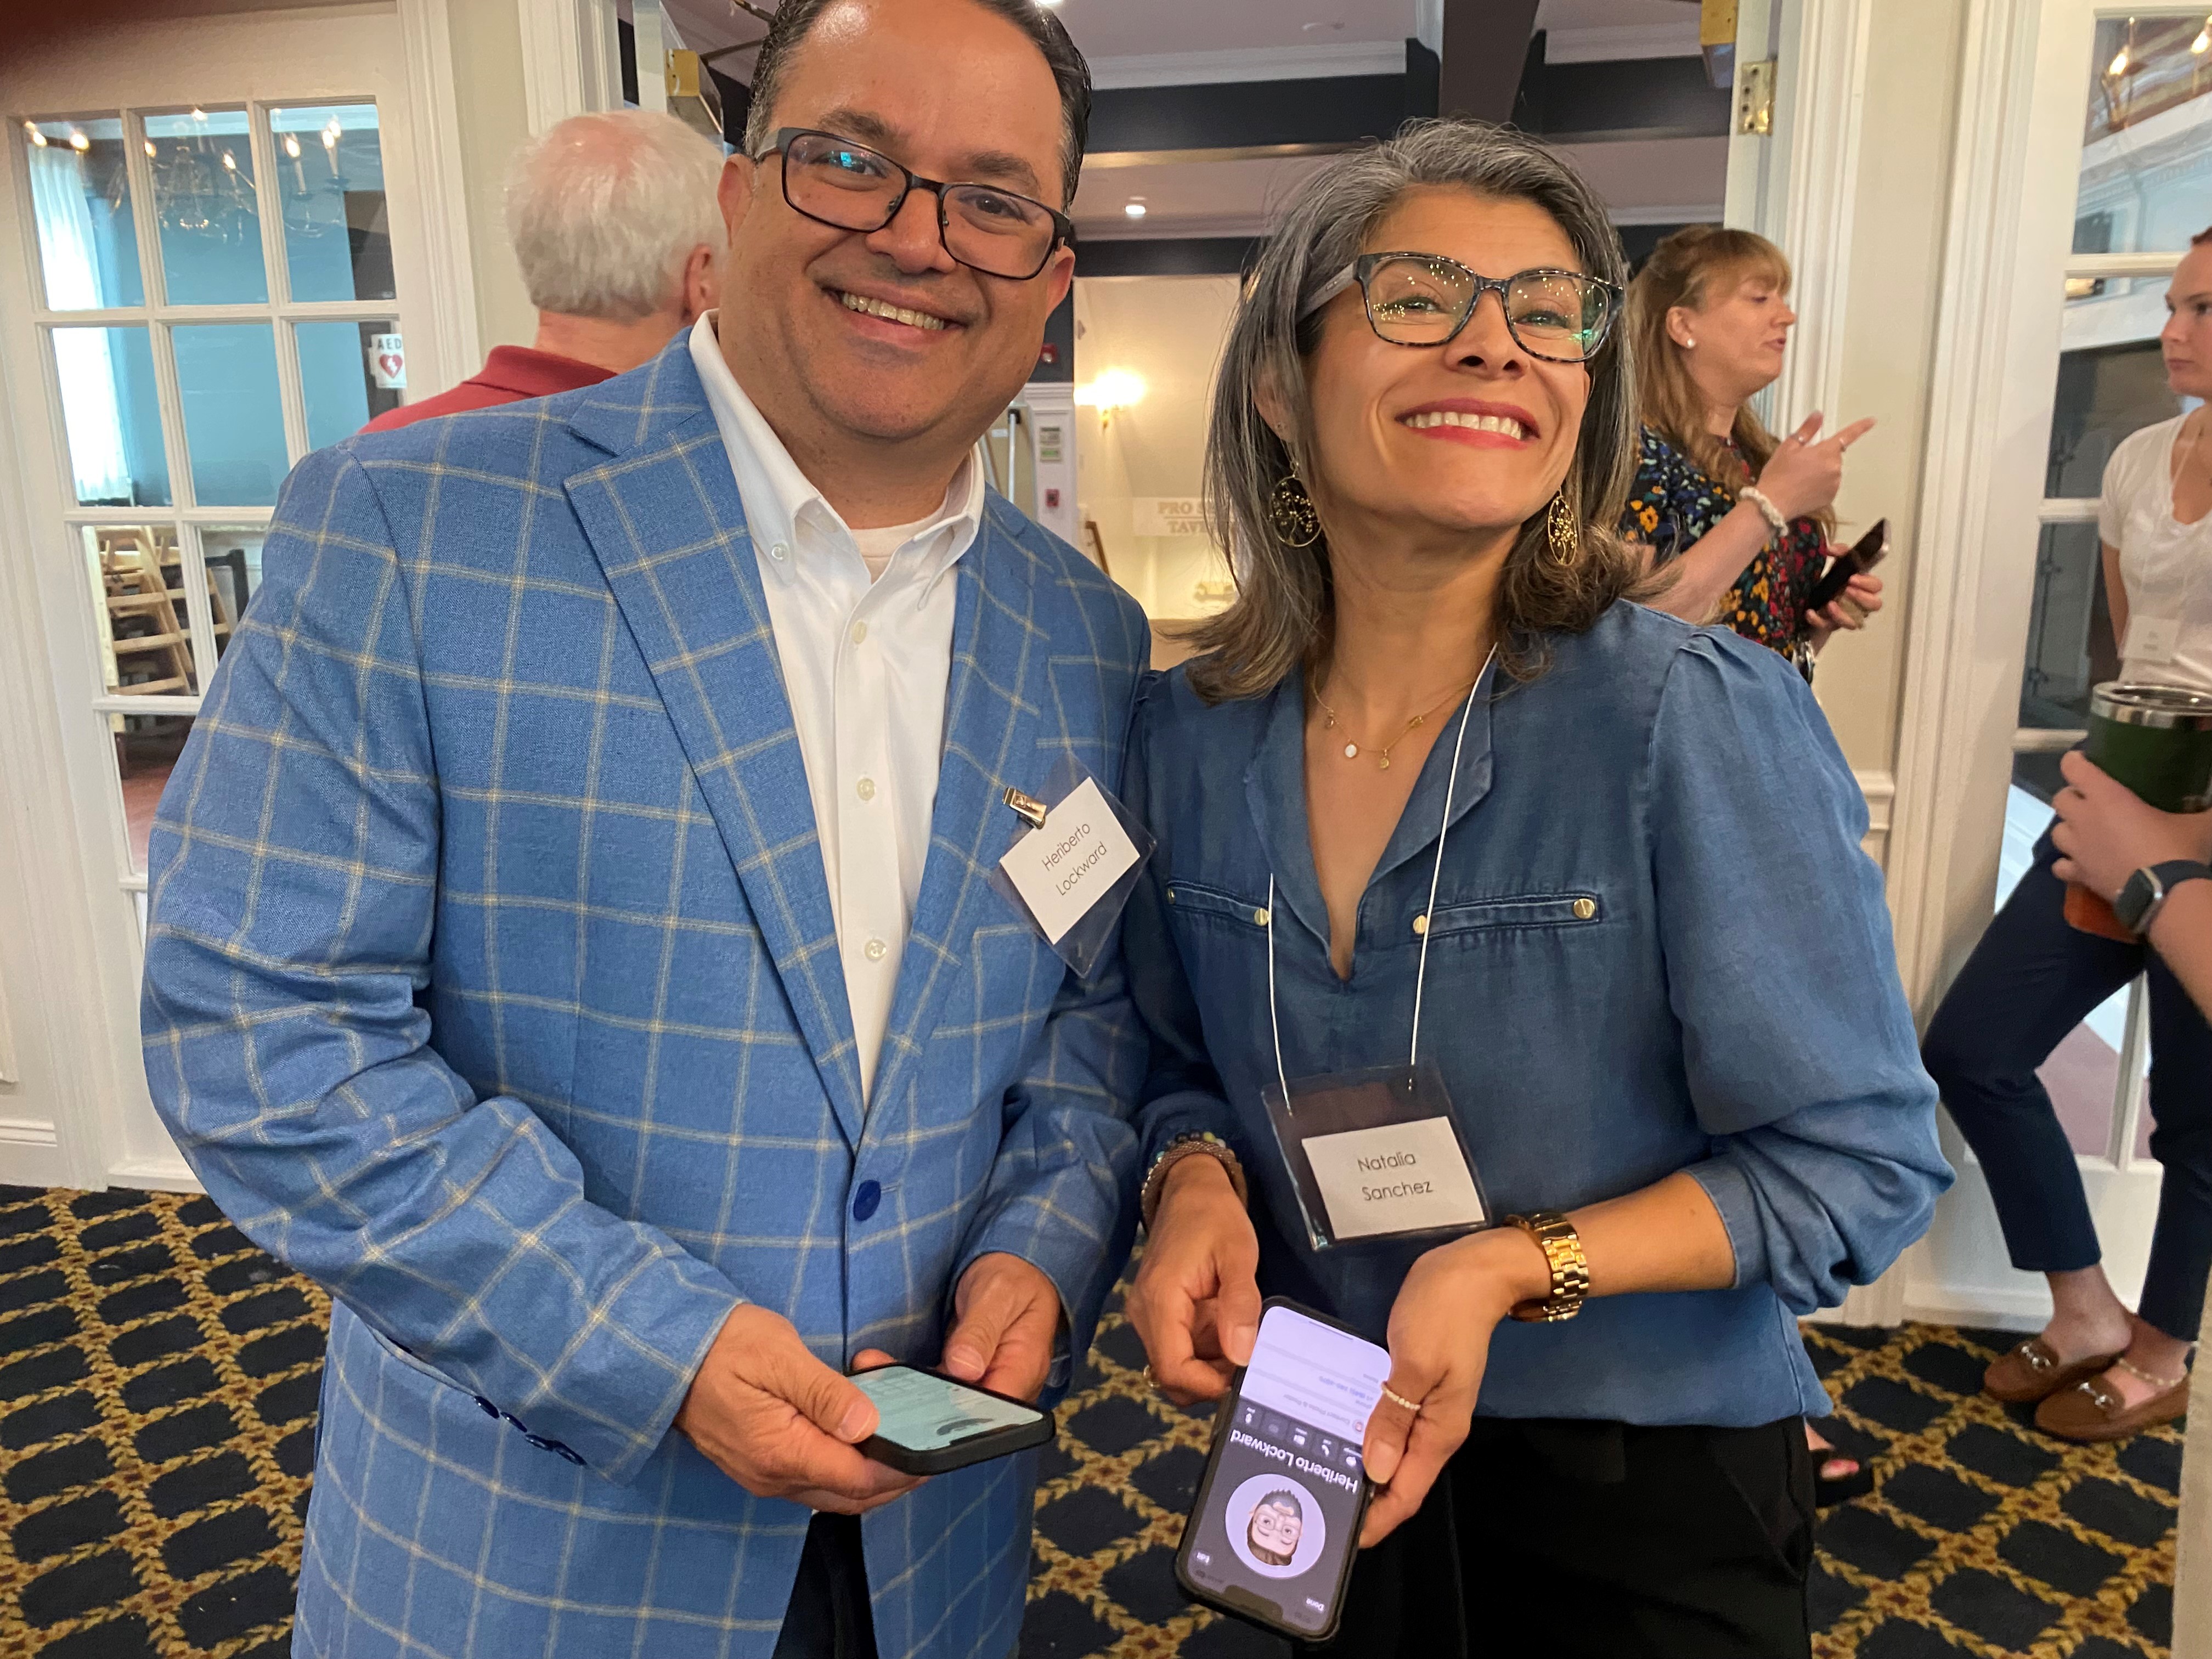 Heriberto Lockwood, Fidelis Care, reconnects with Natalia Sanchez, MA, Prevention Council of Putnam and previously a Public Health Corps Graduate Fellow at the PCDOH.